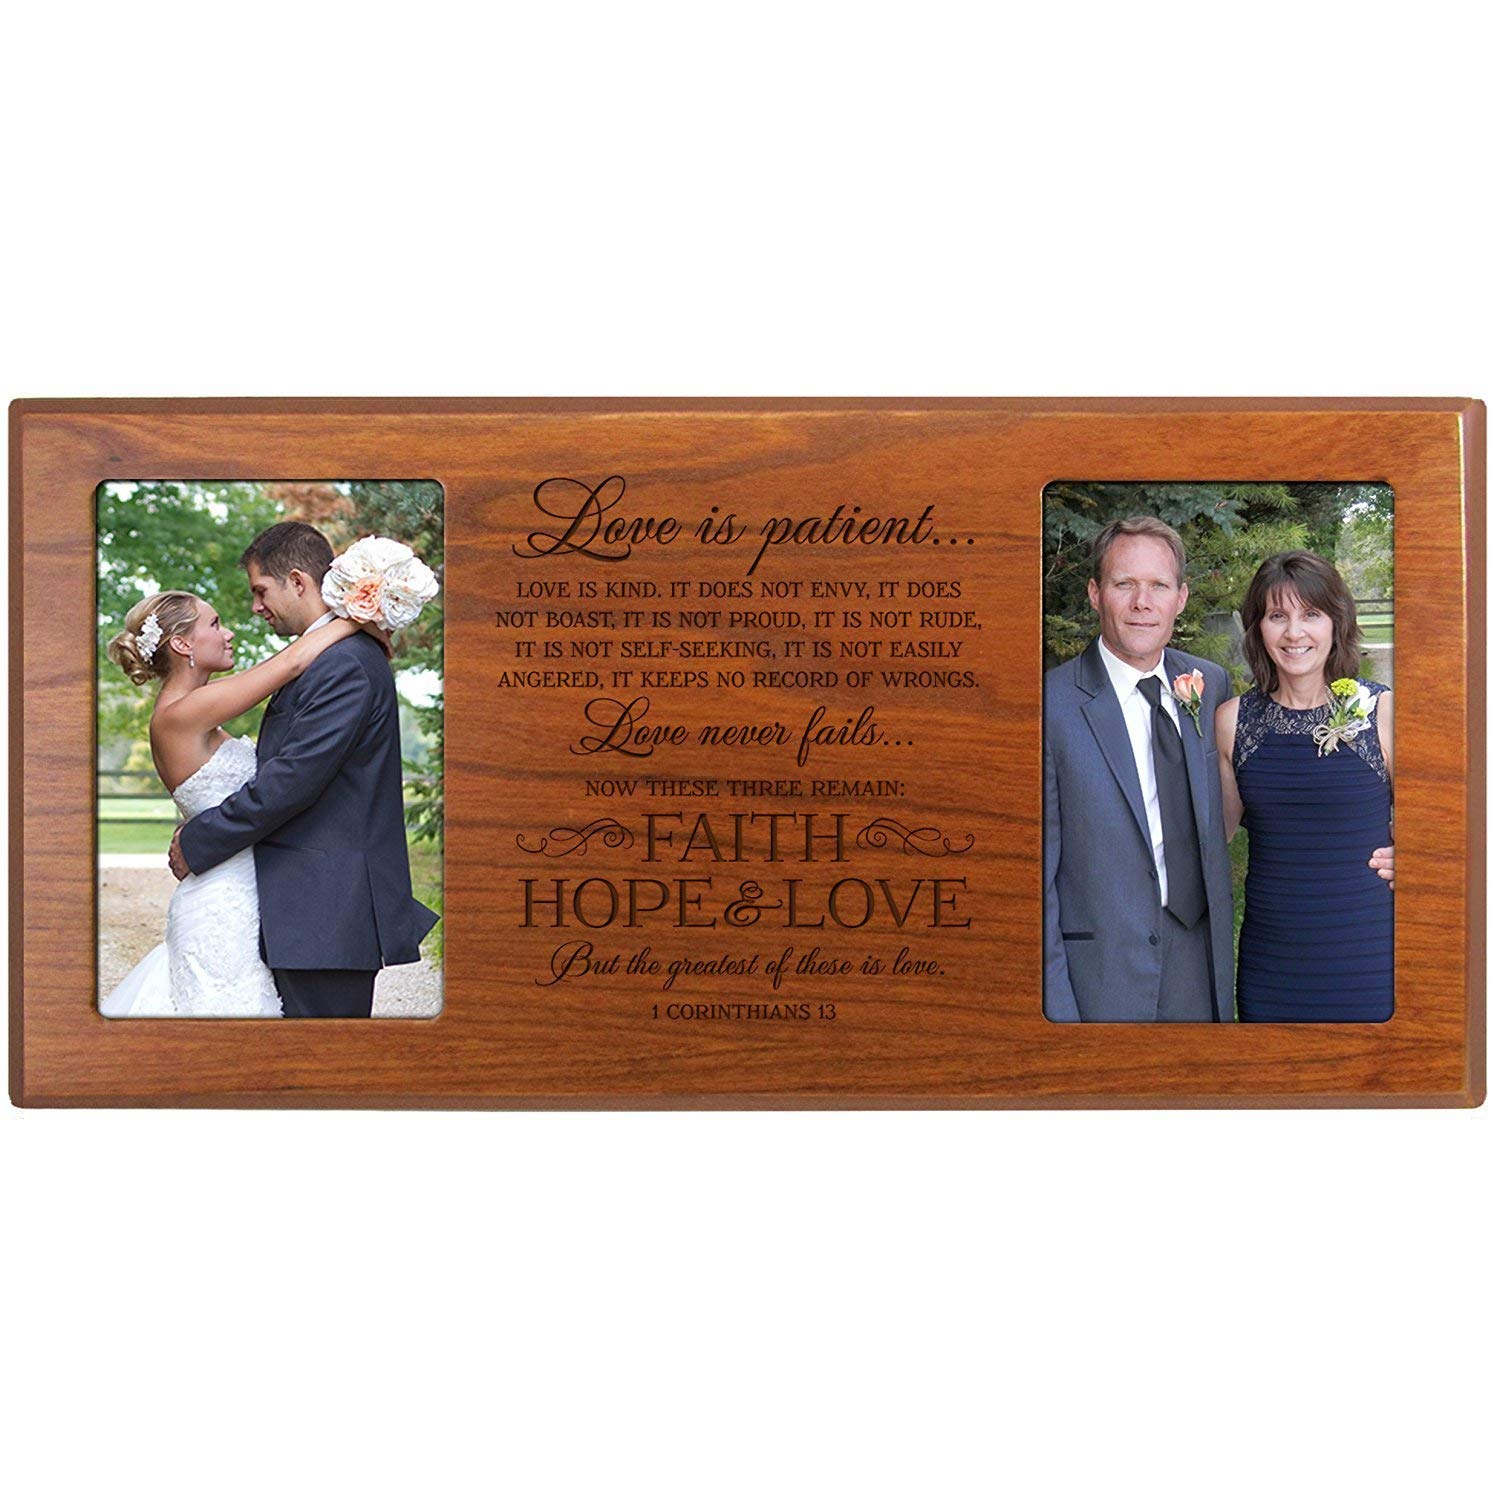 Personalized Parent Wedding 2 Photo Picture Frame Gift Idea "Love is Patient" - LifeSong Milestones